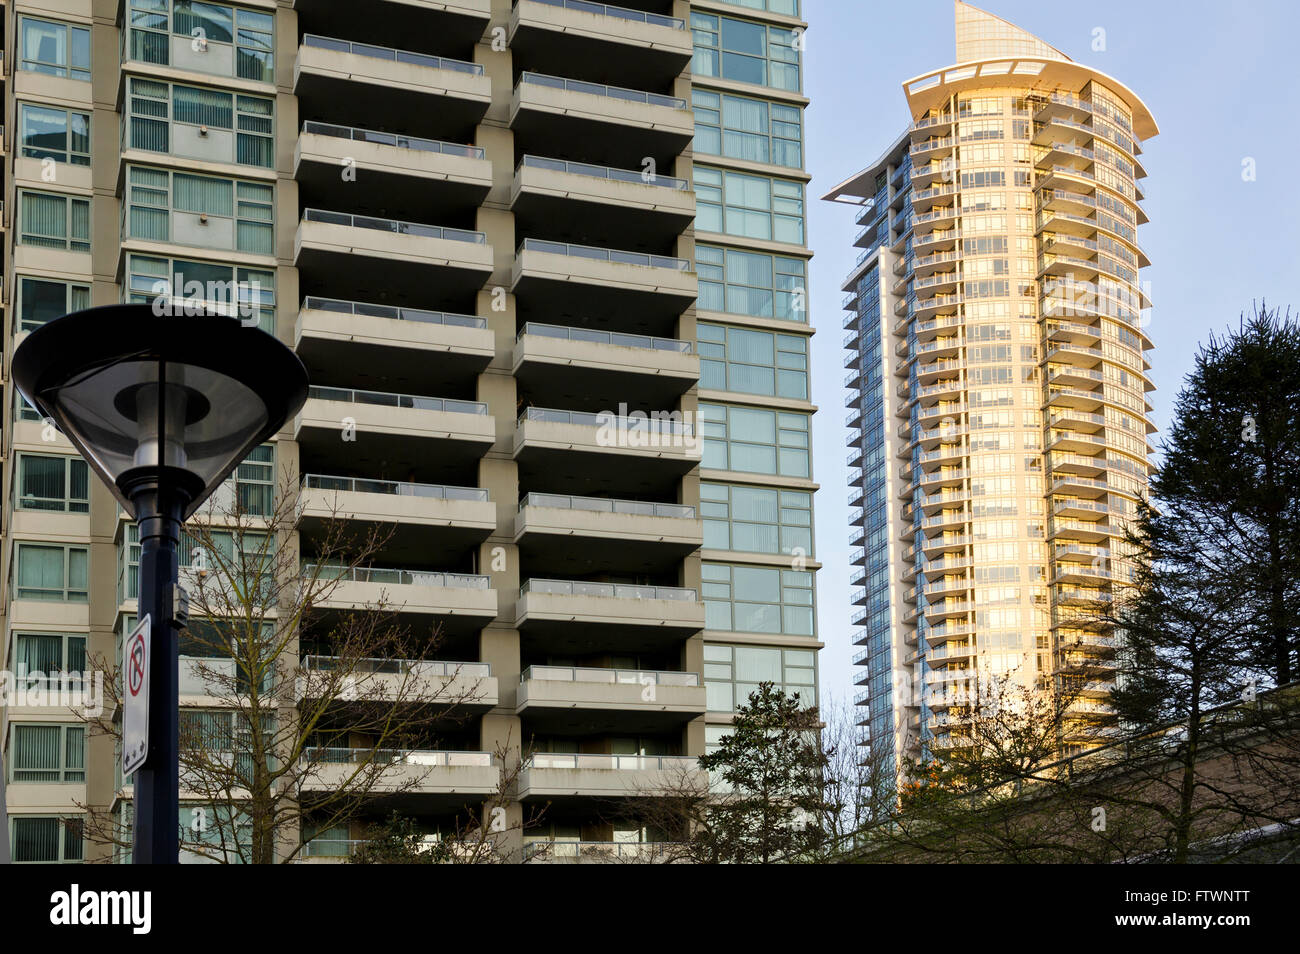 Modern apartment towers in Burnaby, British Columbia (Greater Vancouver). Condominium buildings with many stories or floors. Stock Photo